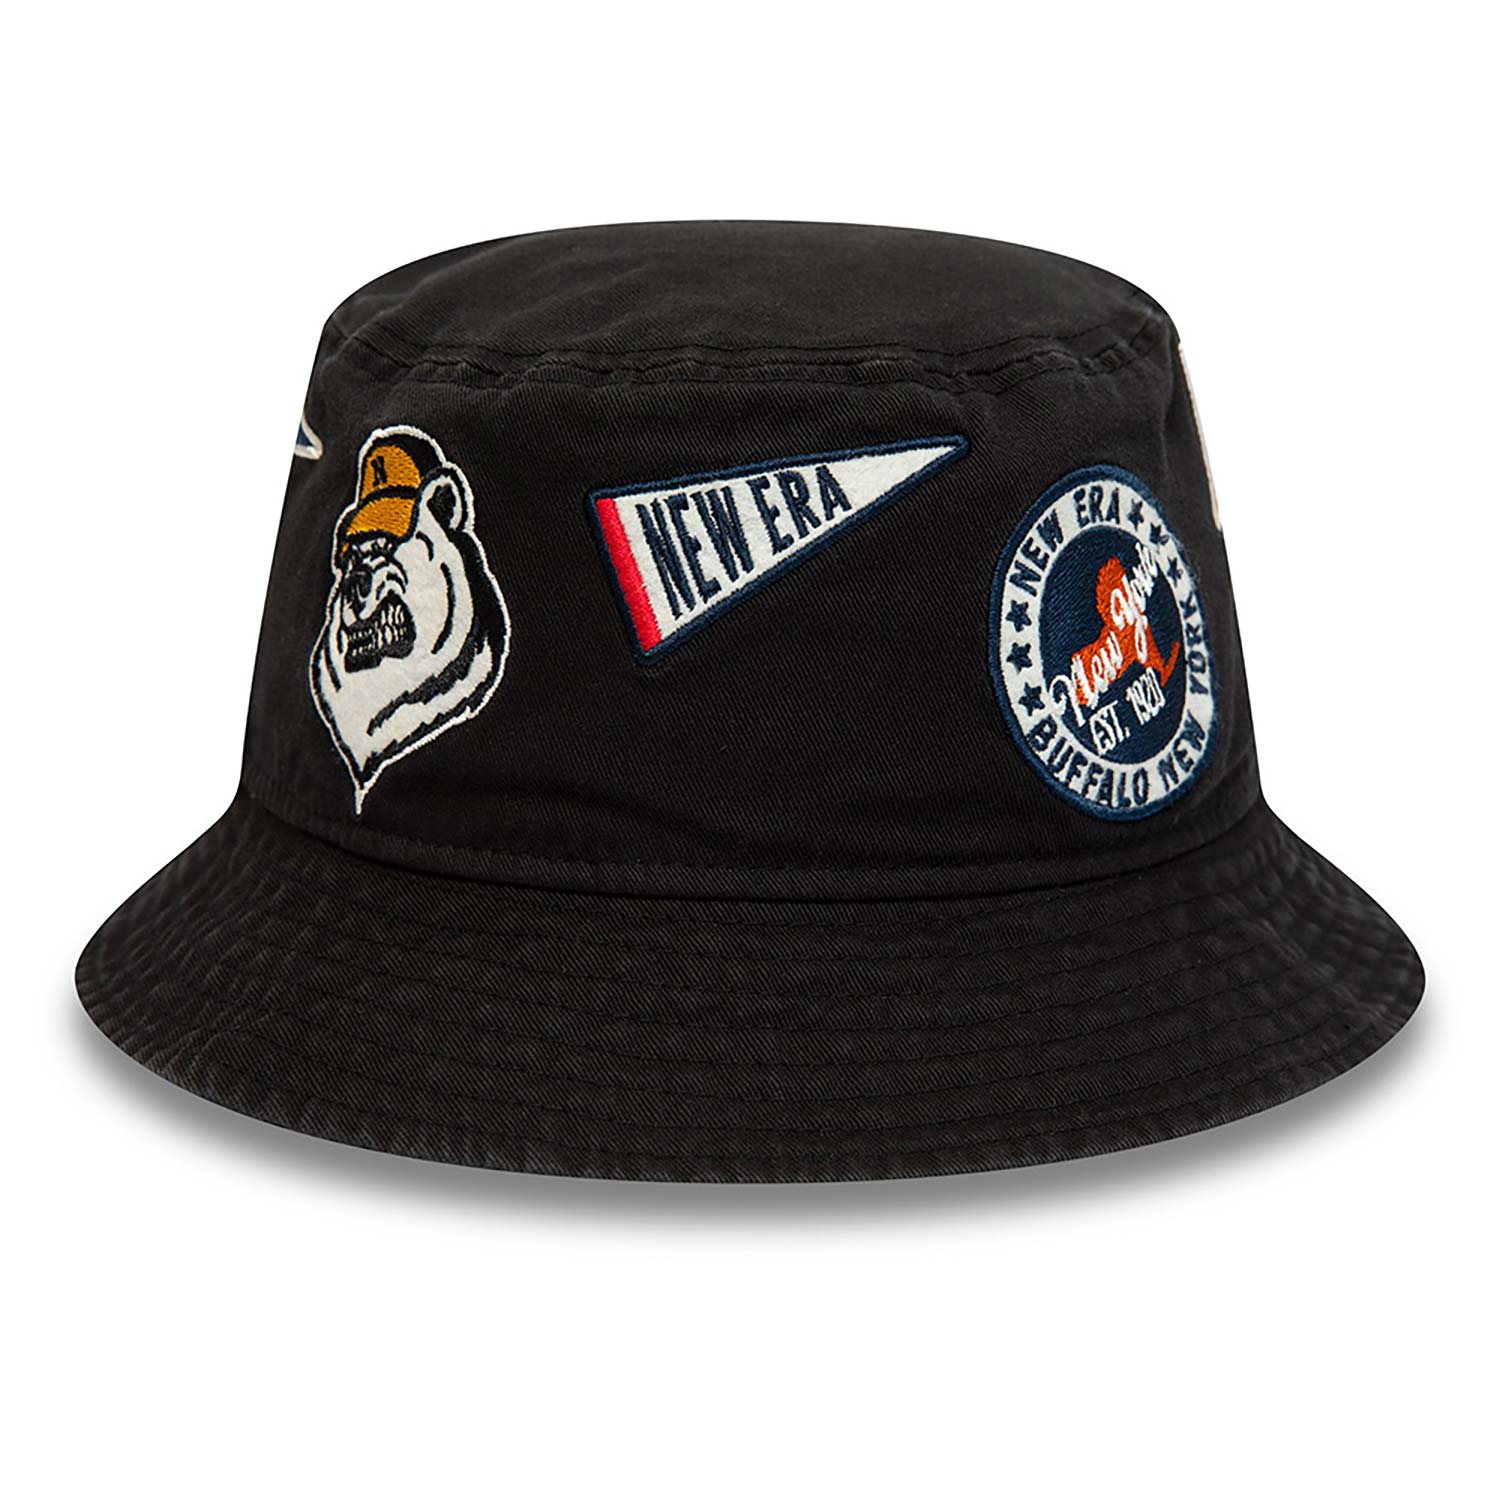 New Era Heritage All Over Patch Black Bucket Hat